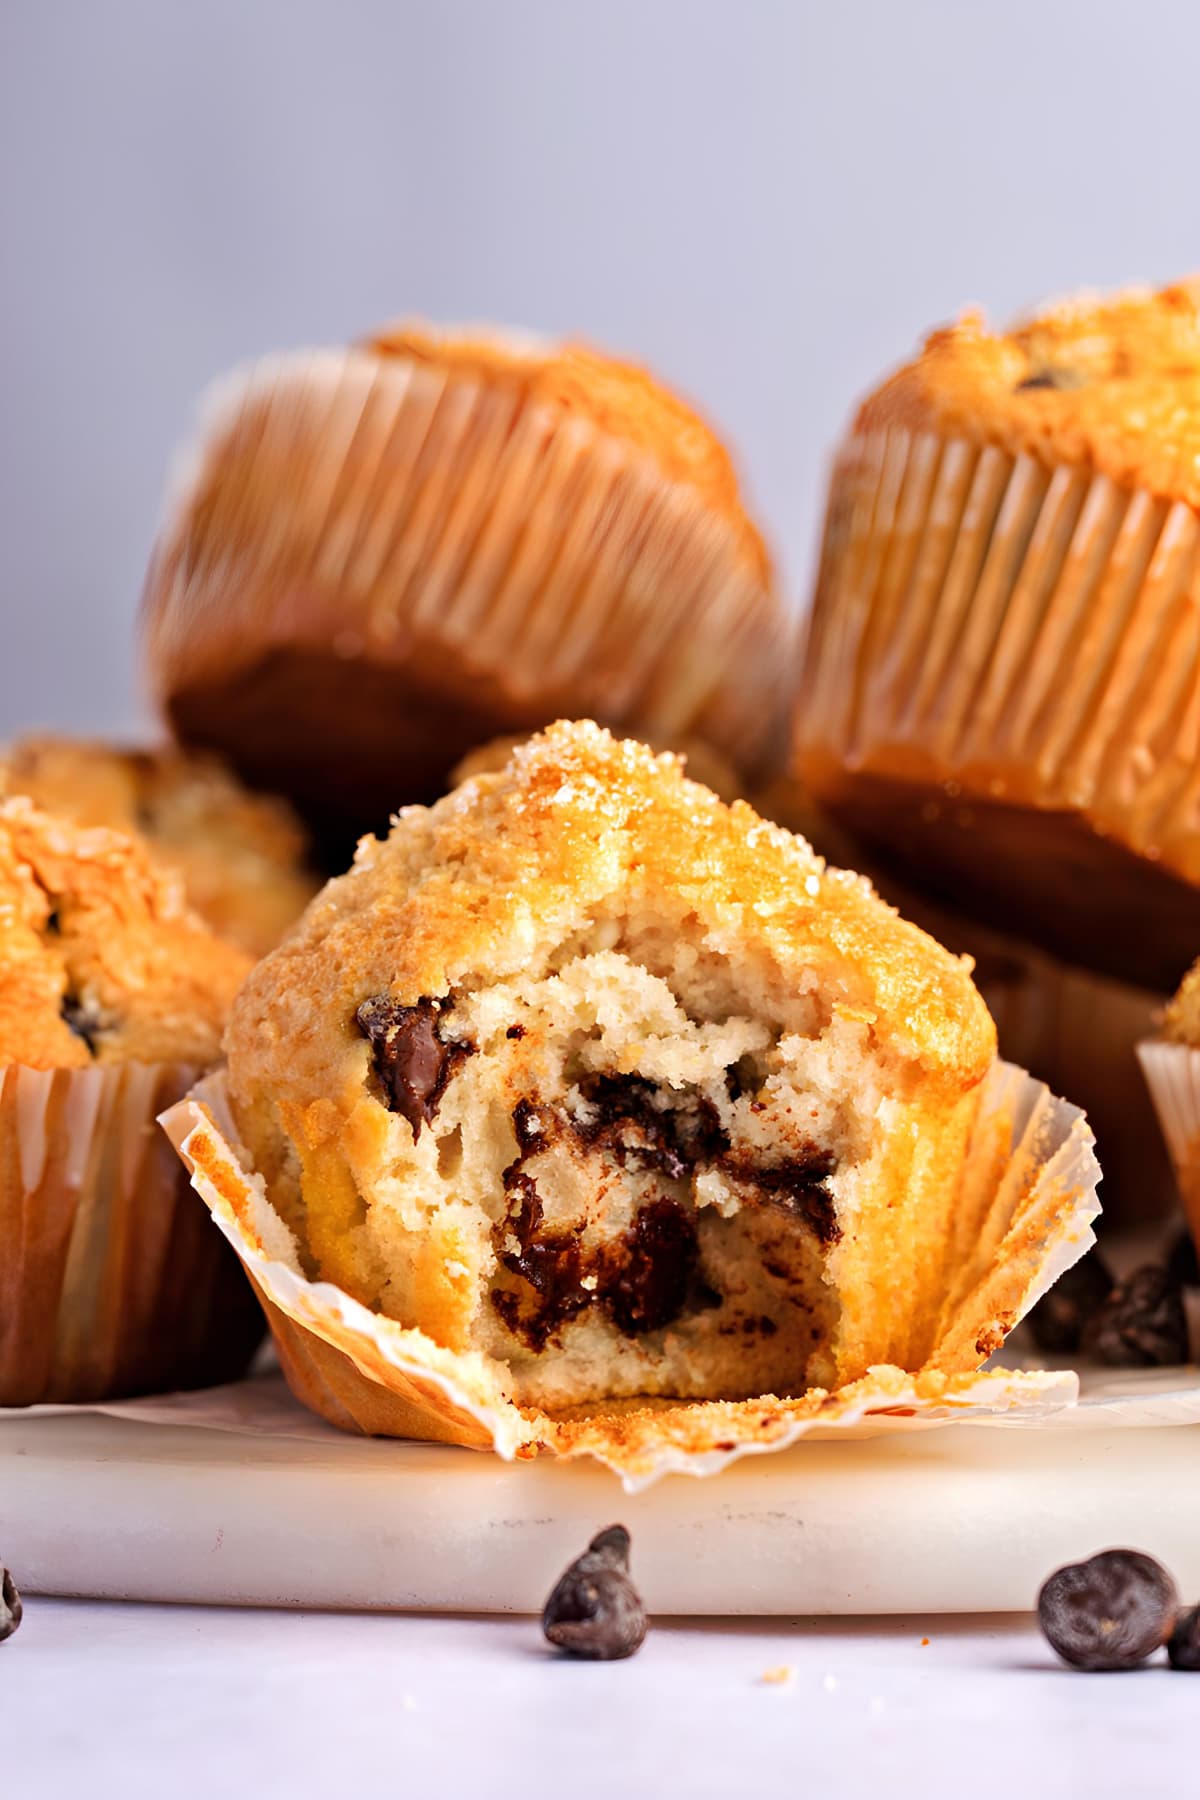 Homemade Soft and Moist Chocolate Chip Muffins